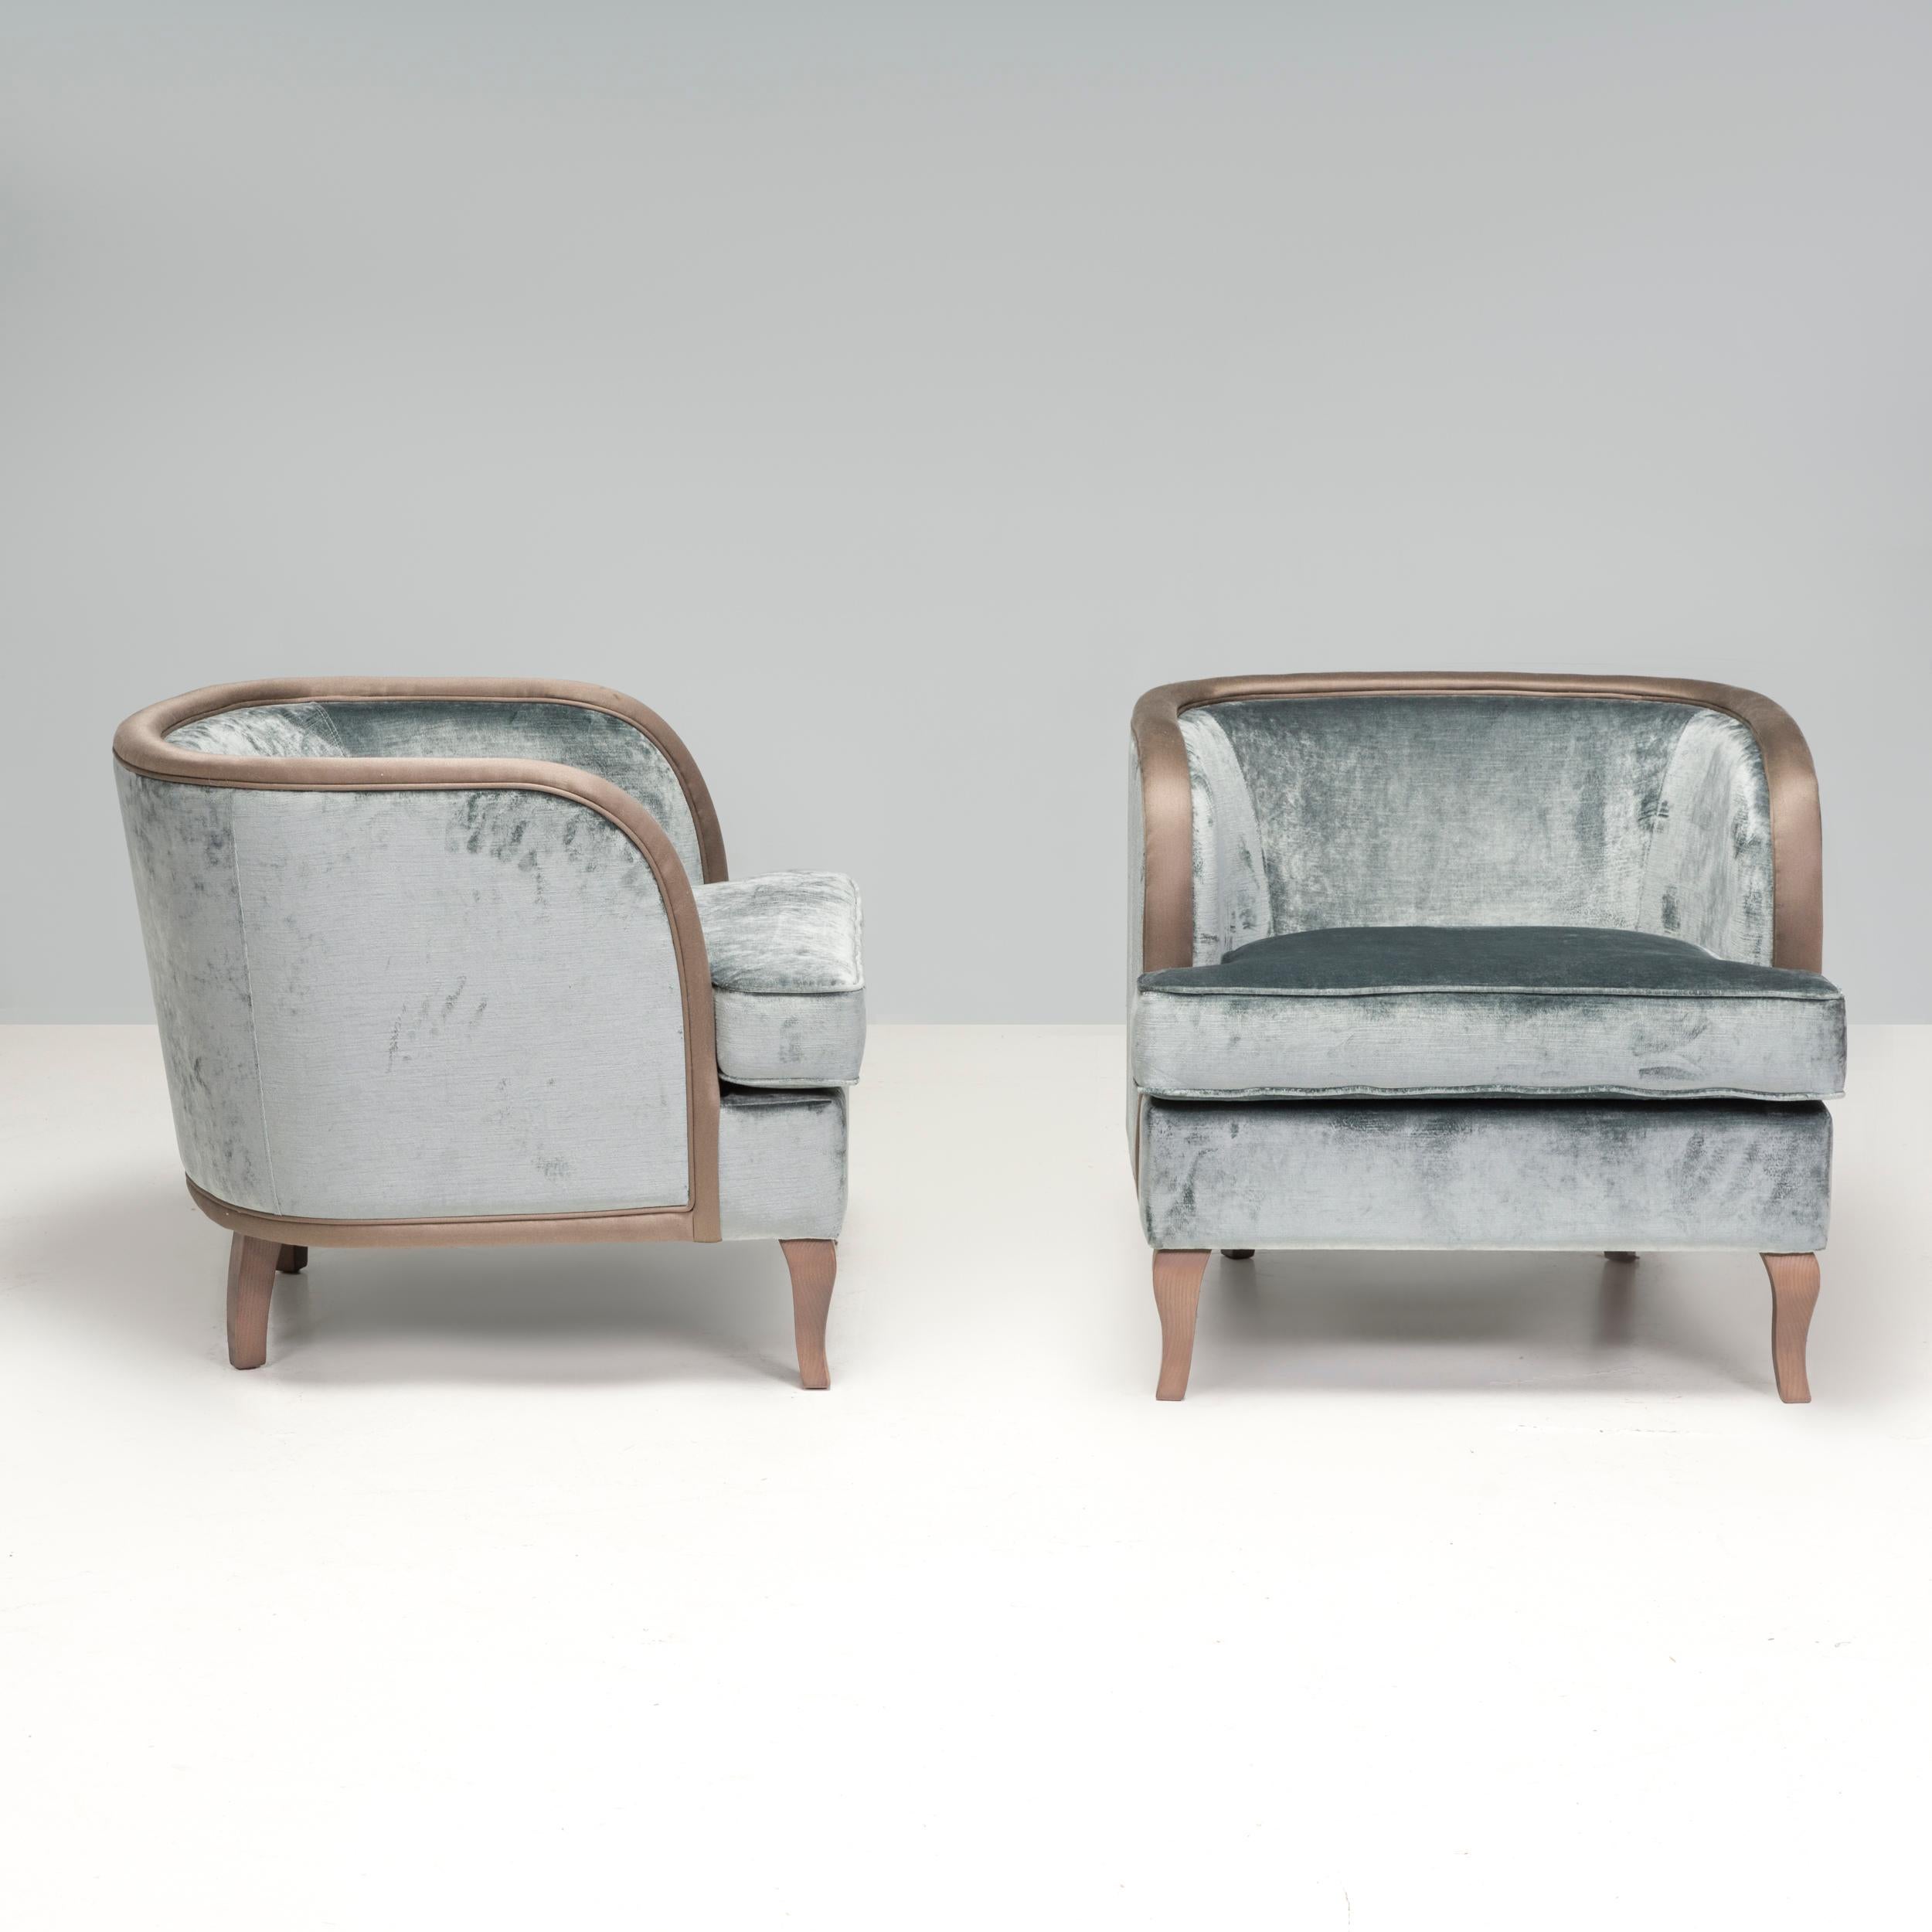 These grey velvet armchairs have an impressive design that would elevate any living space or bedroom. Their neutral colour palette mean they would harmonise well with a range of interior aesthetics whilst adding a note of originality. The details of